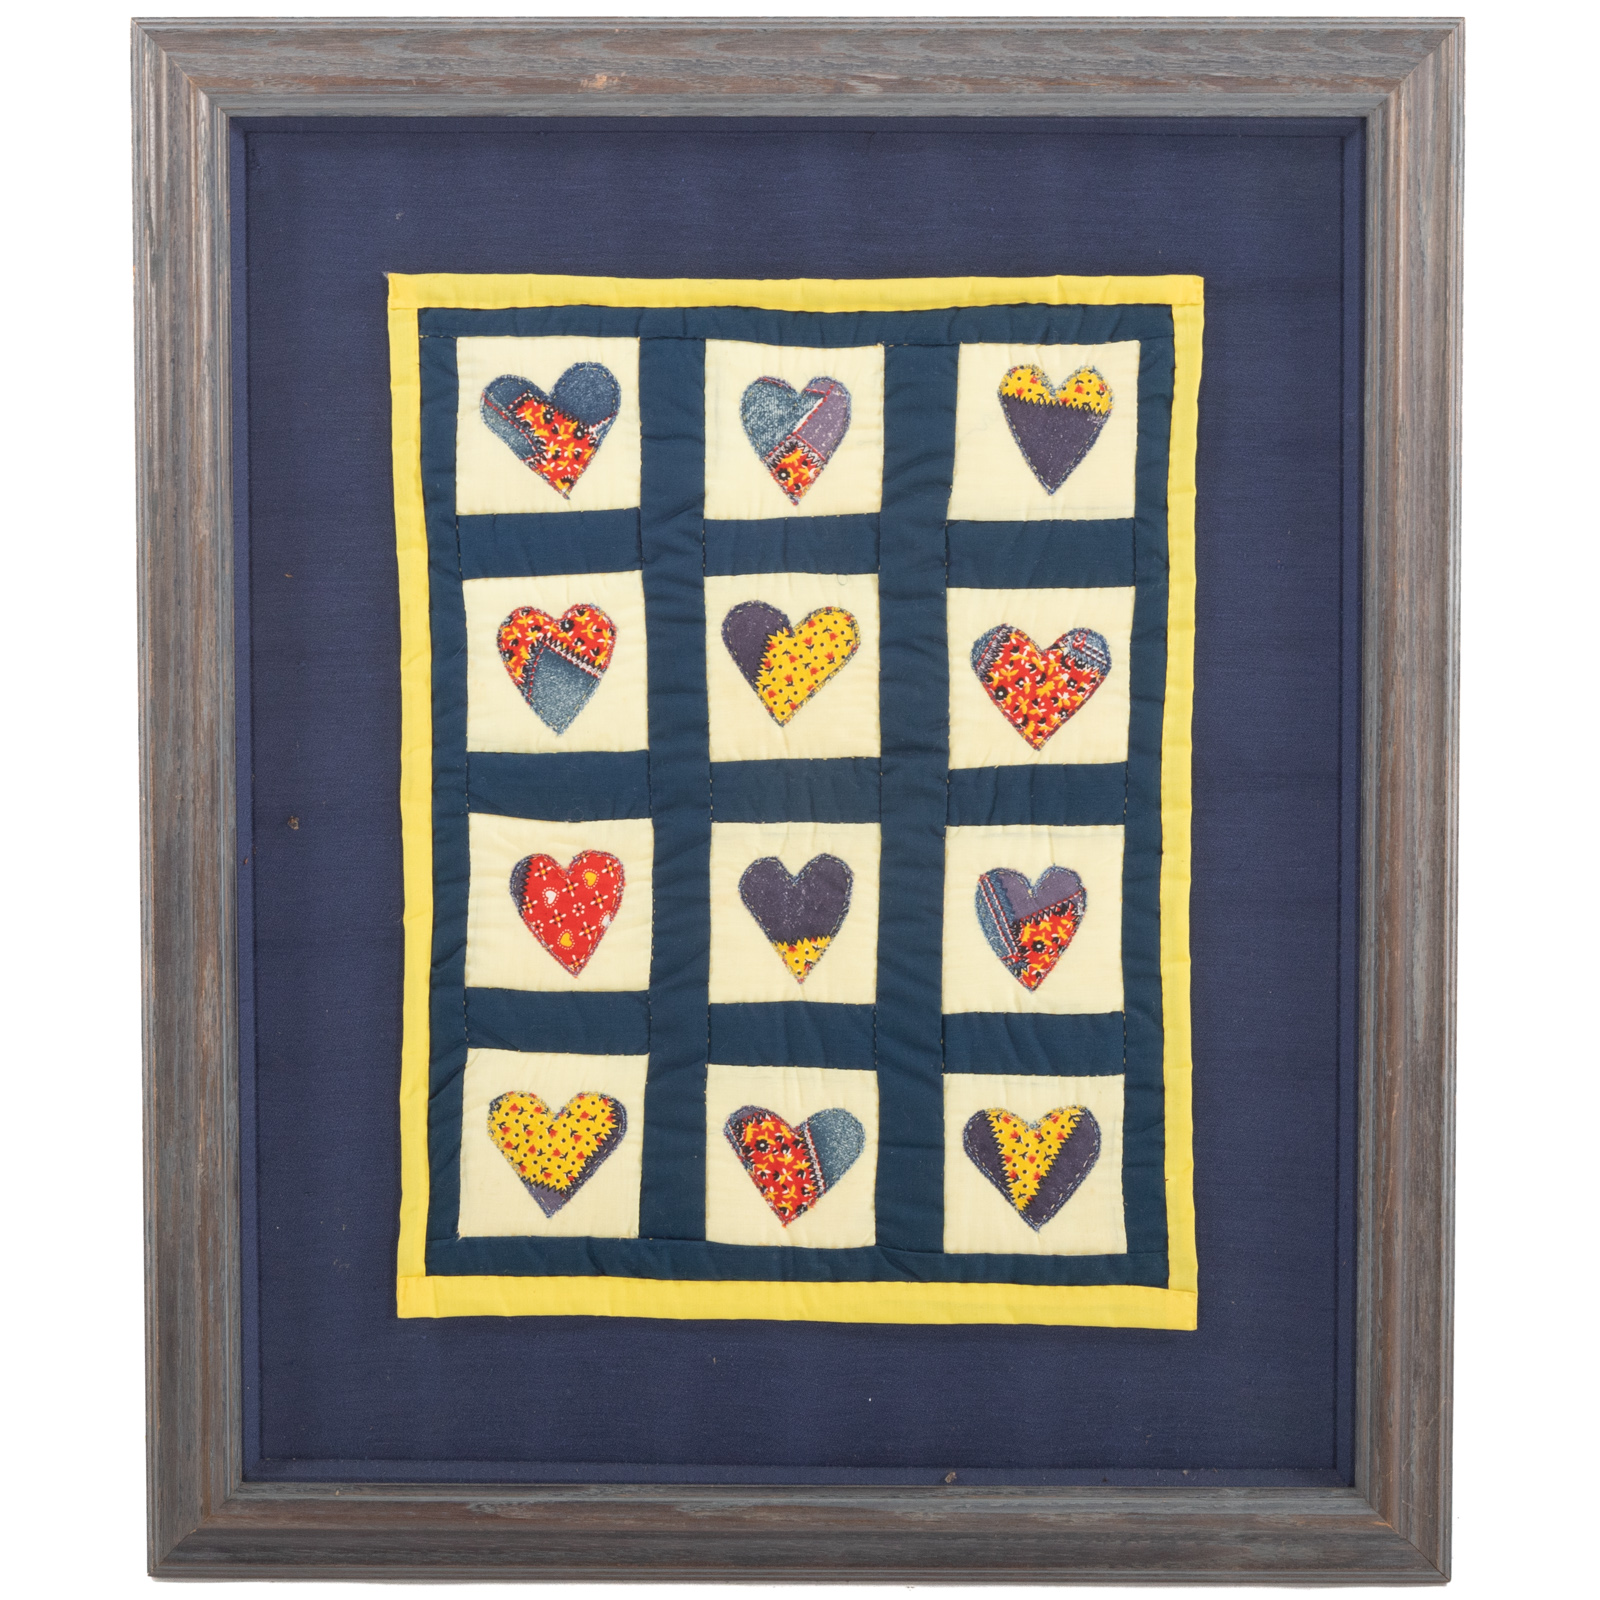 HAND-STITCHED FRAMED QUILTED PANEL